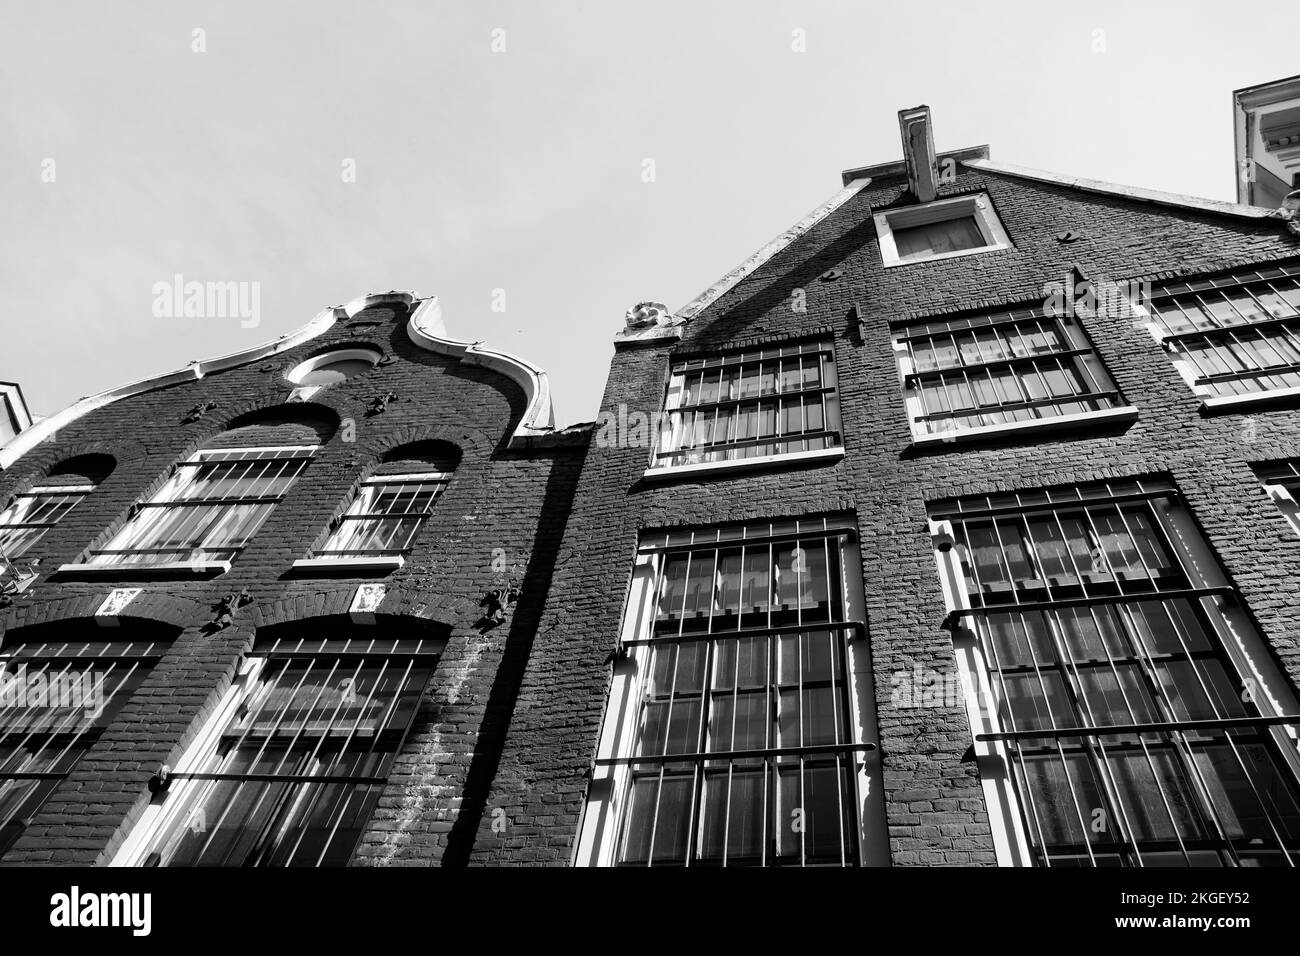 Old historic building in the center of Amsterdam, Netherlands Stock Photo